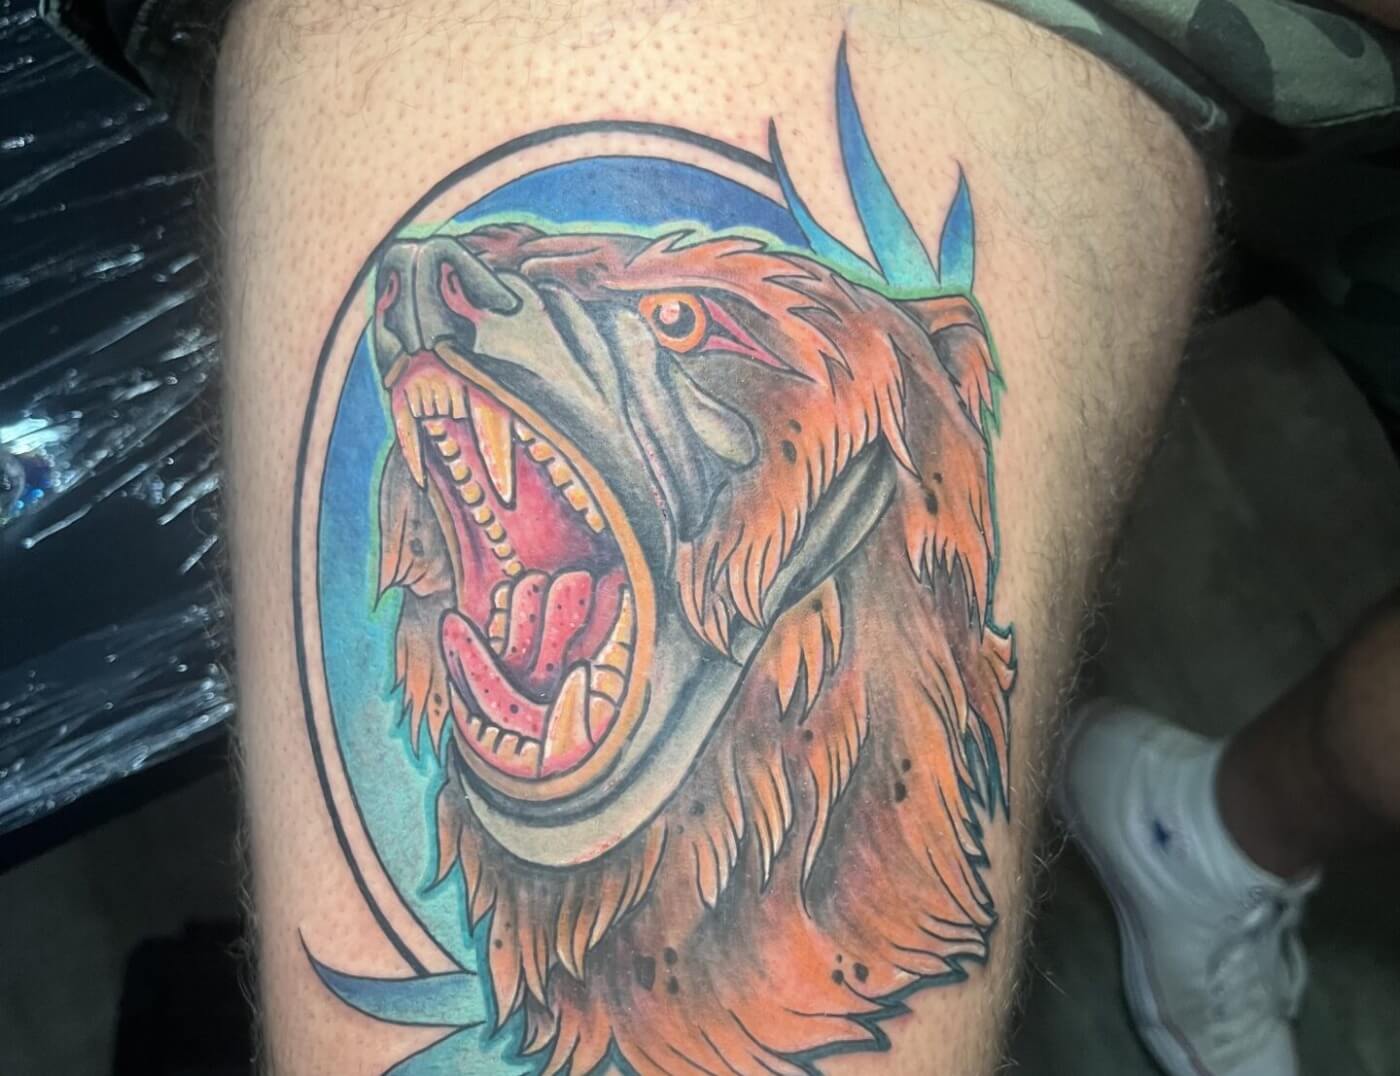 Color Kodiak bear tattoo by artist Paper Airplane Jane in downtown Atlanta at Iron Palm Tattoos. Call 404-973-7828 or stop by for a free consultation to book Jane.